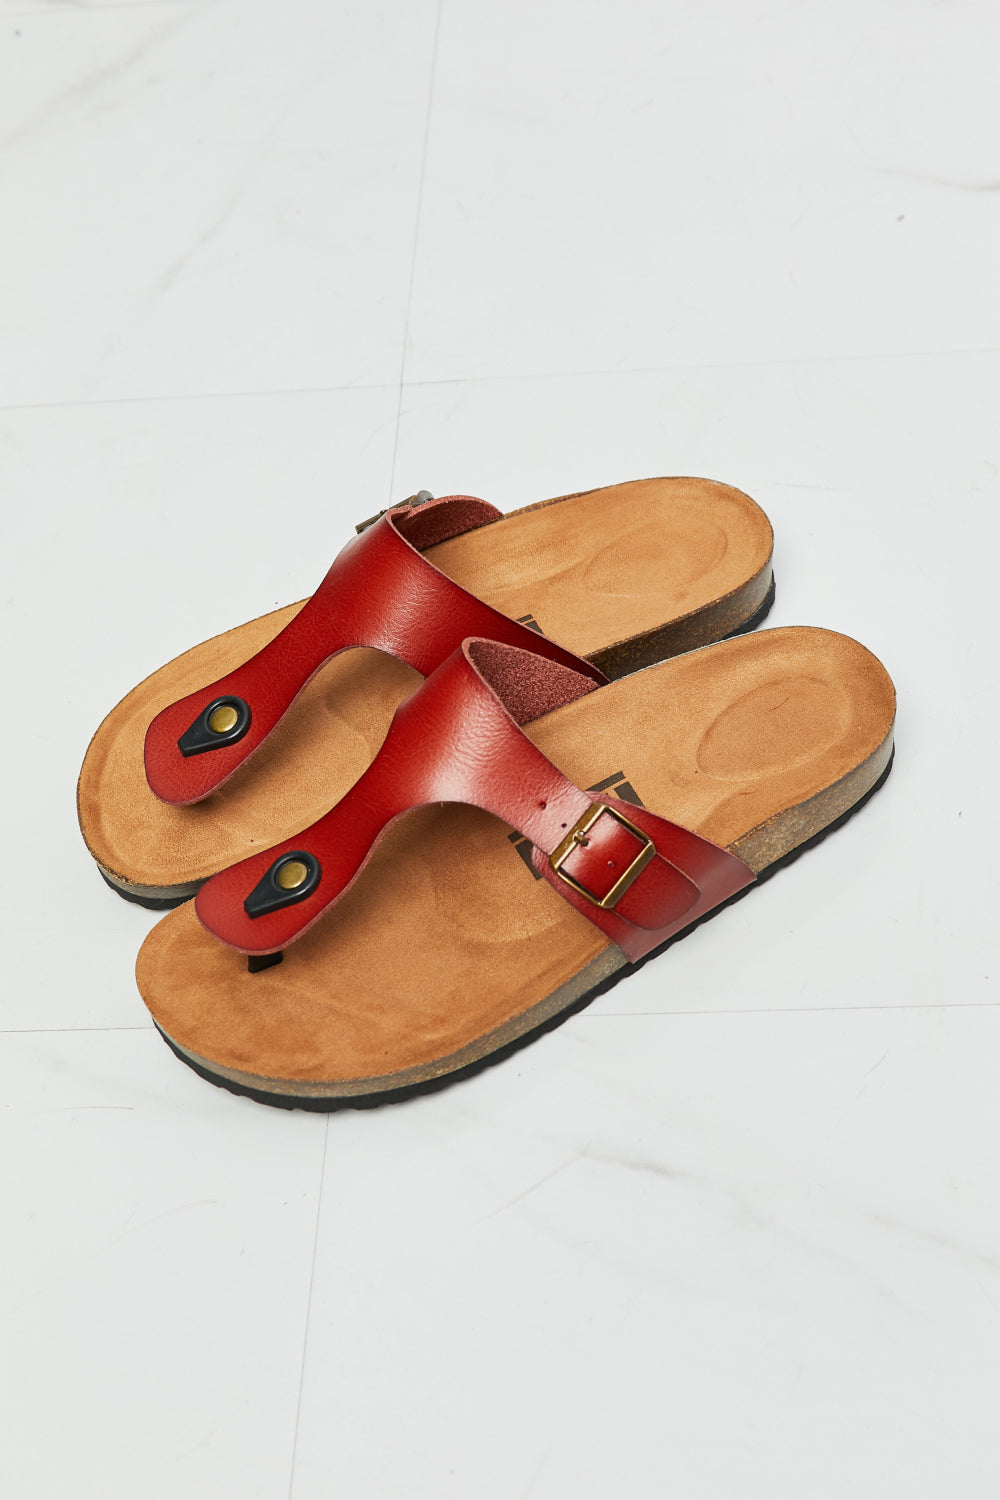 MMShoes Drift Away T-Strap Flip-Flop in Red - Sun of the Beach Boutique